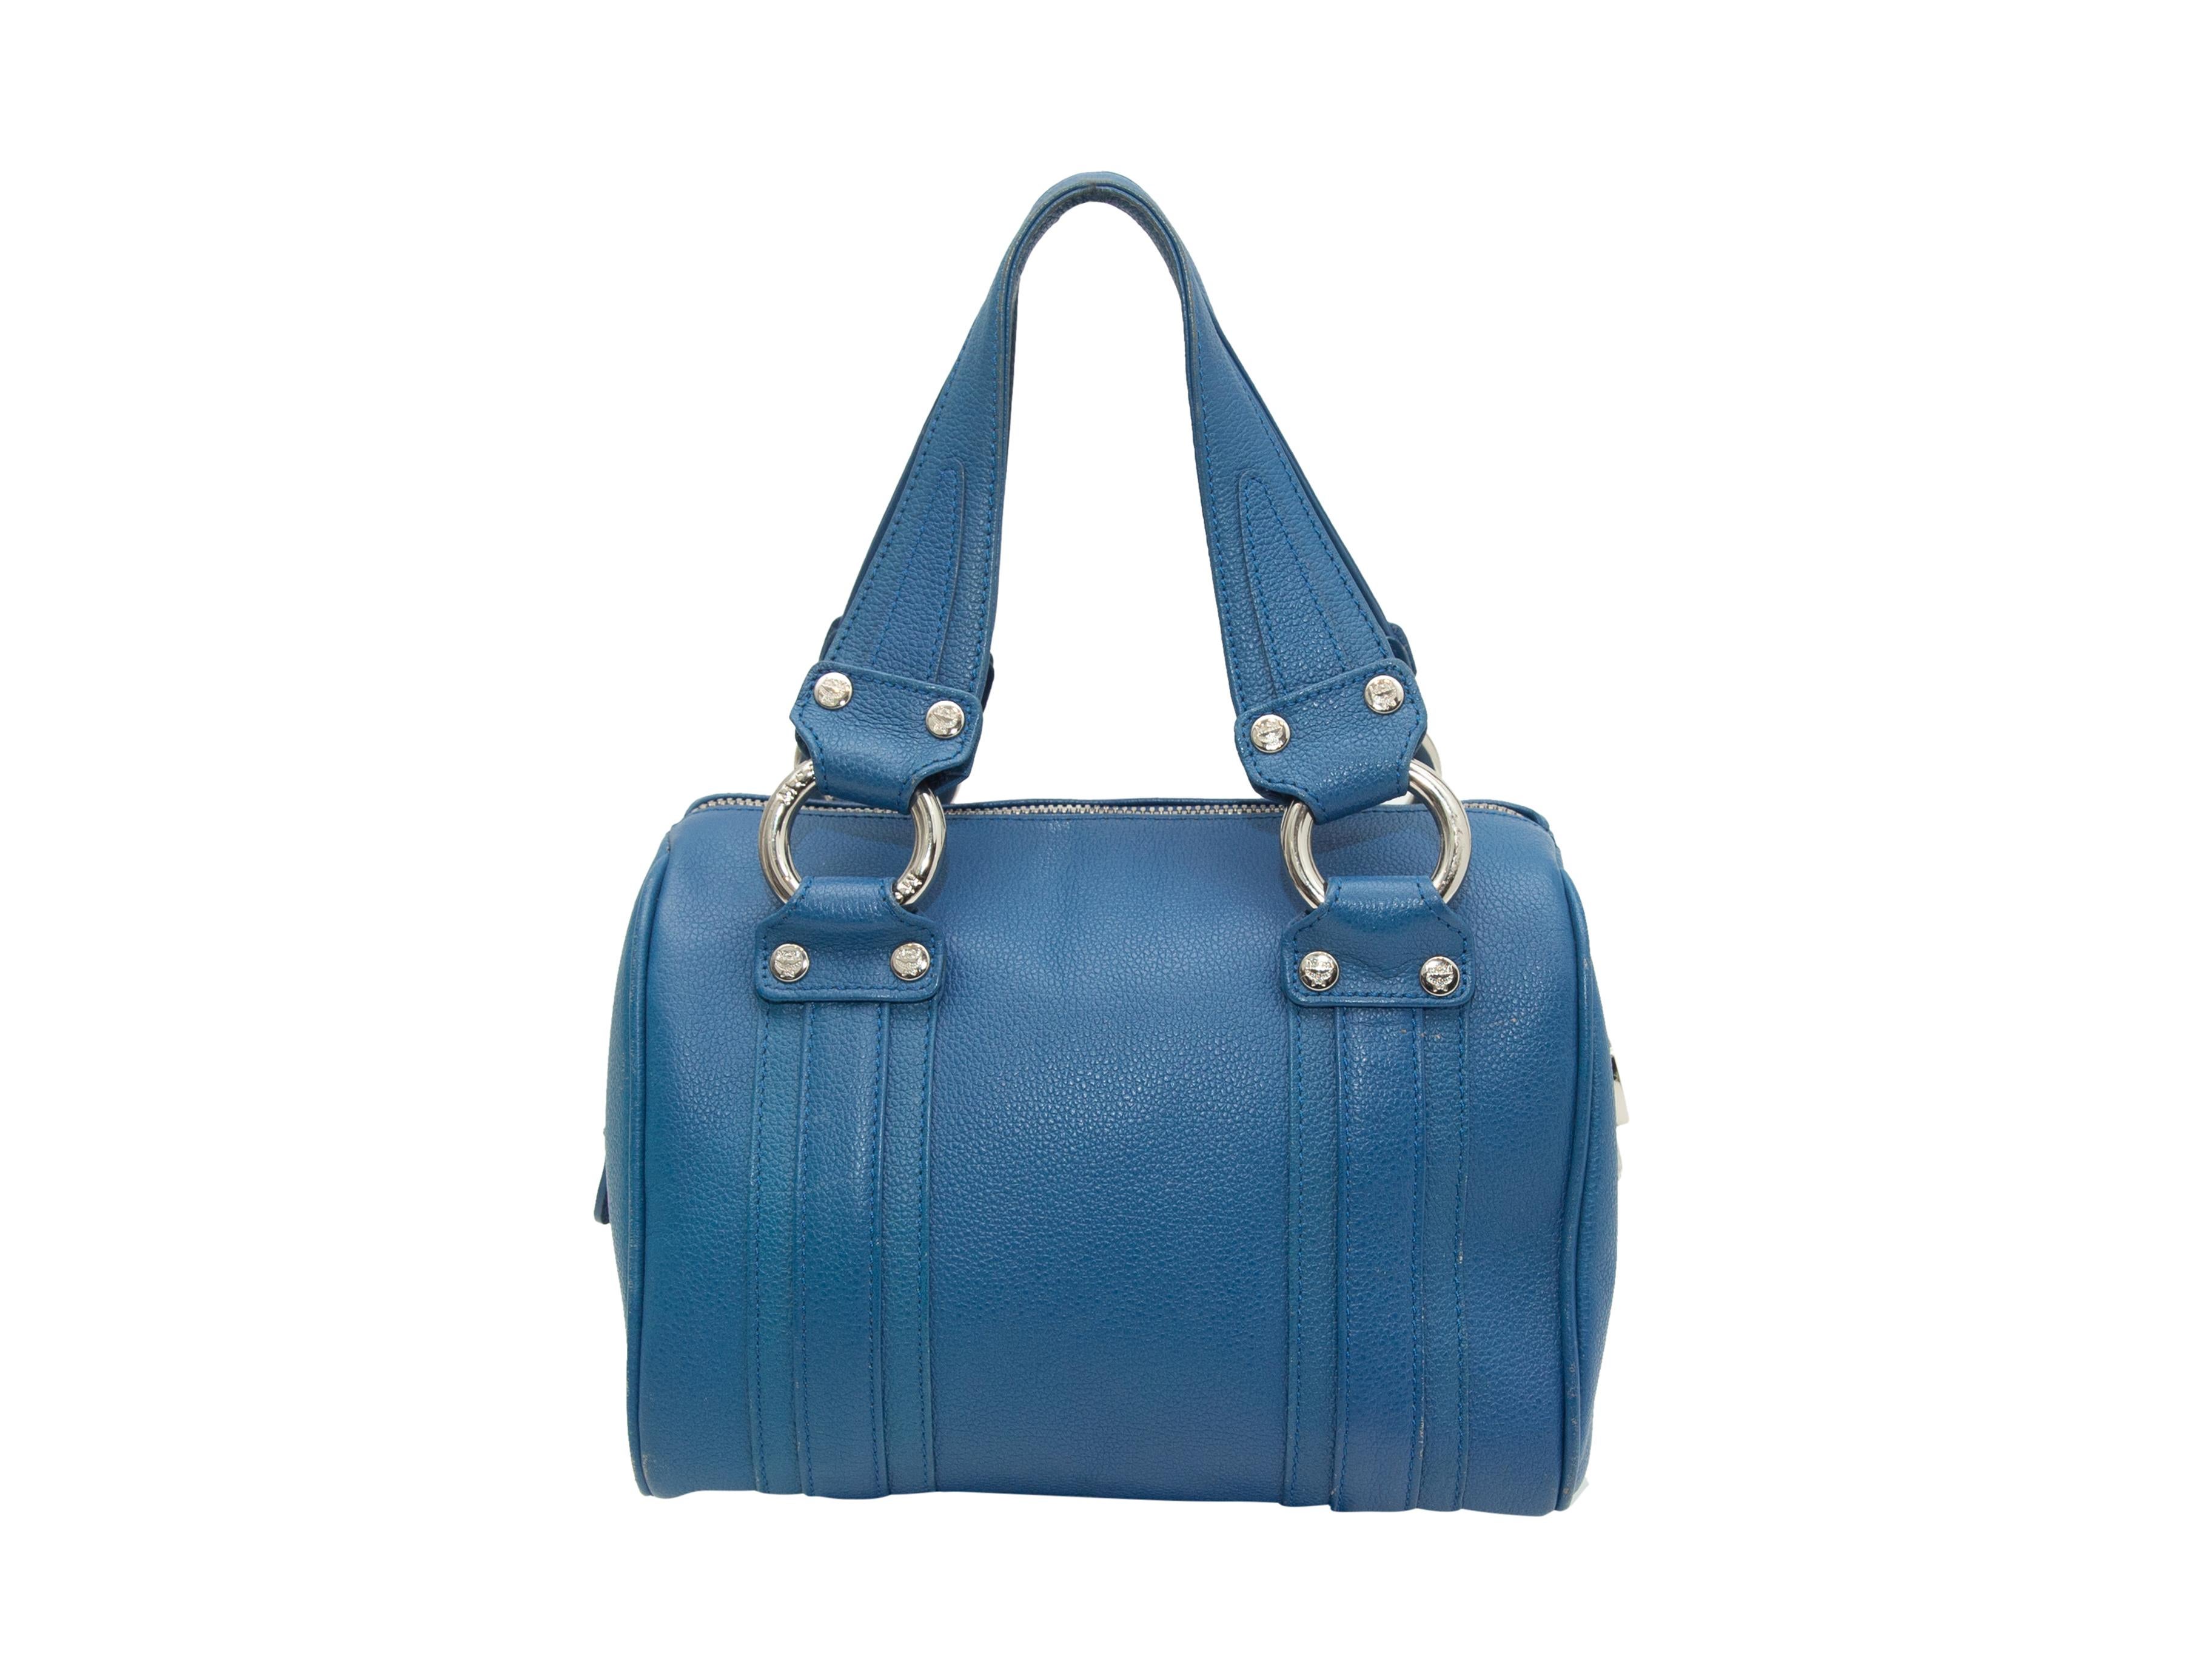 Product details: Blue leather small Boston handbag by MCM. Silver-tone hardware. Dual top handles. Zip closure at top. 8